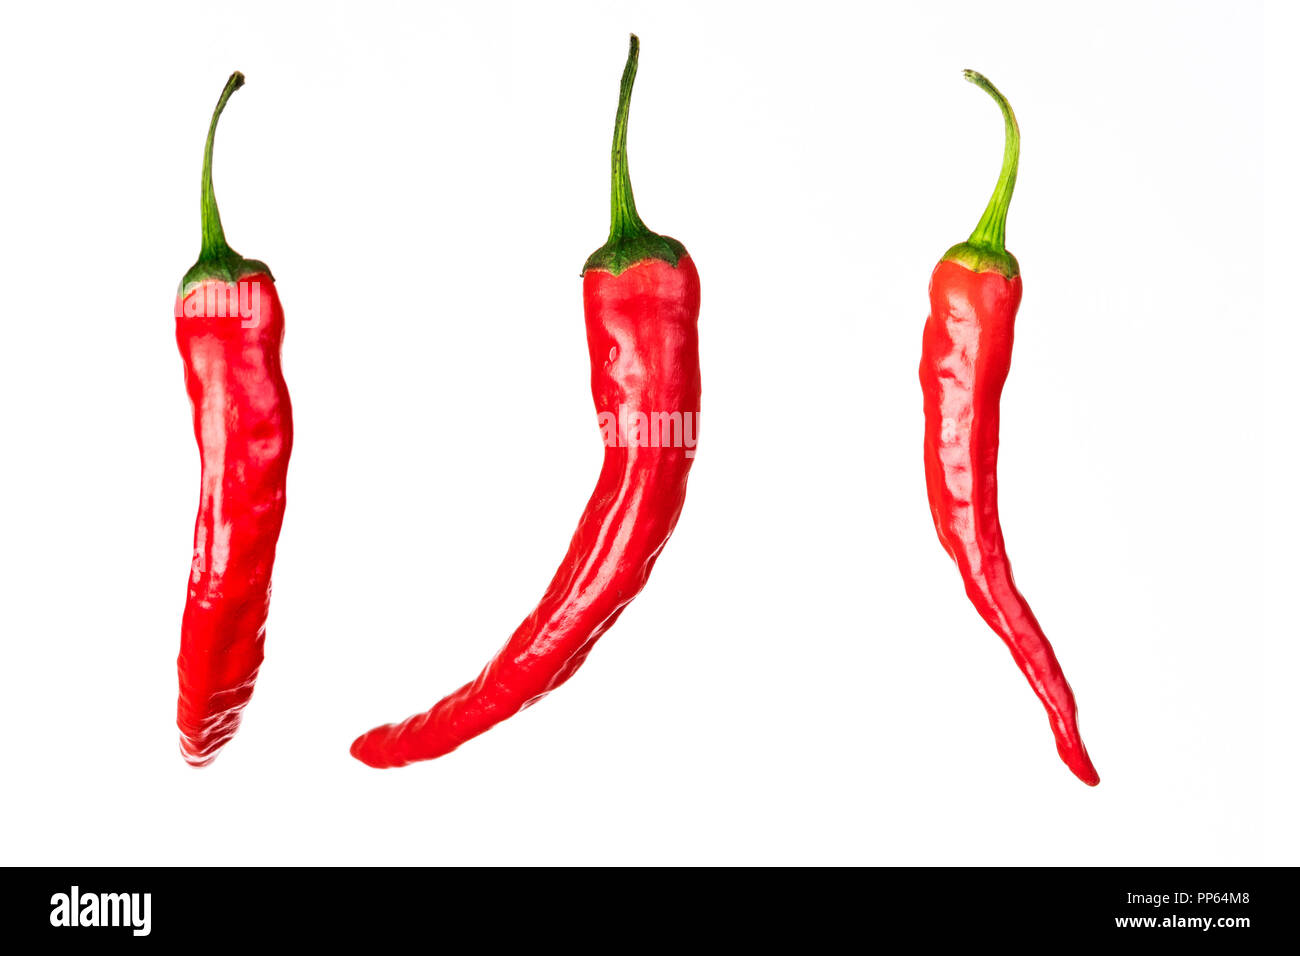 three pieces of red chili peppers isolated on white background Stock Photo